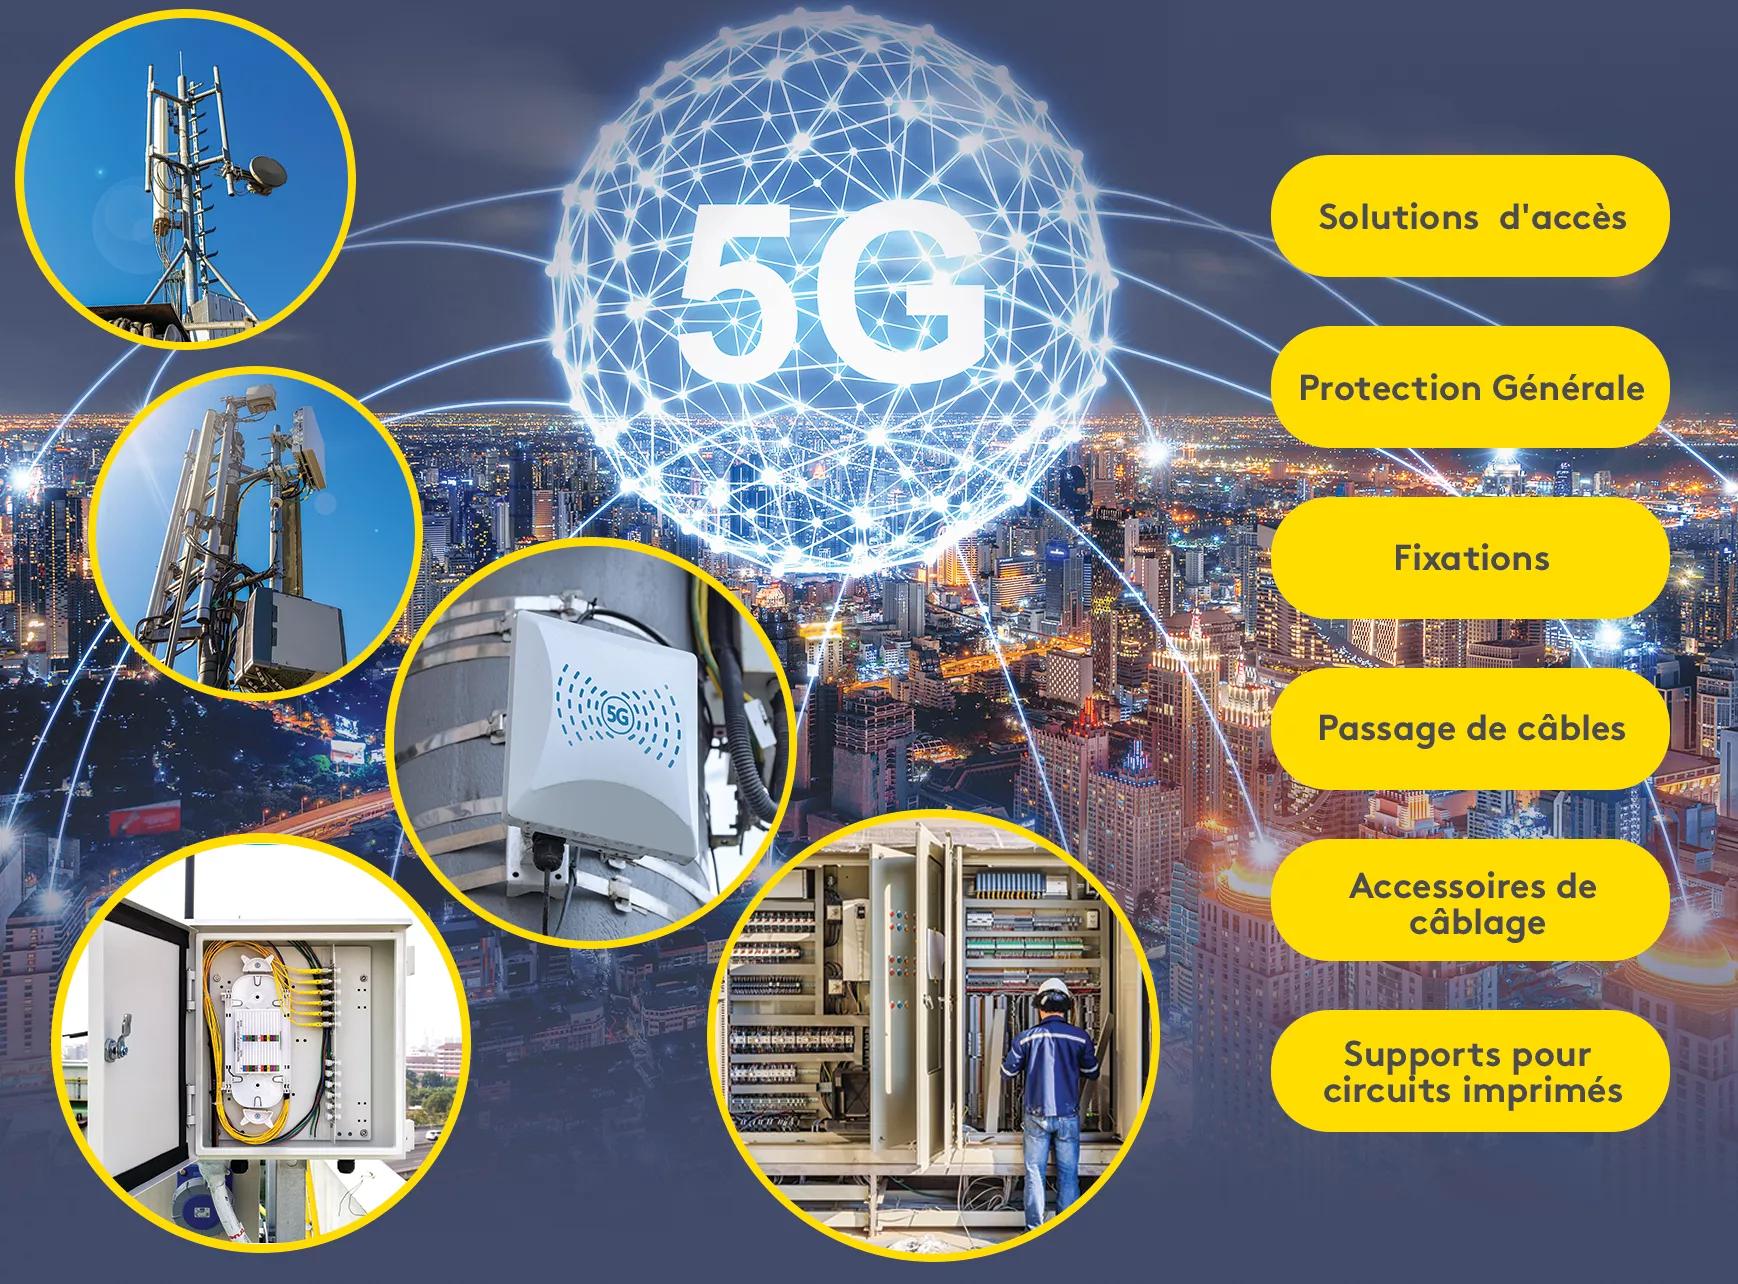 5G network components